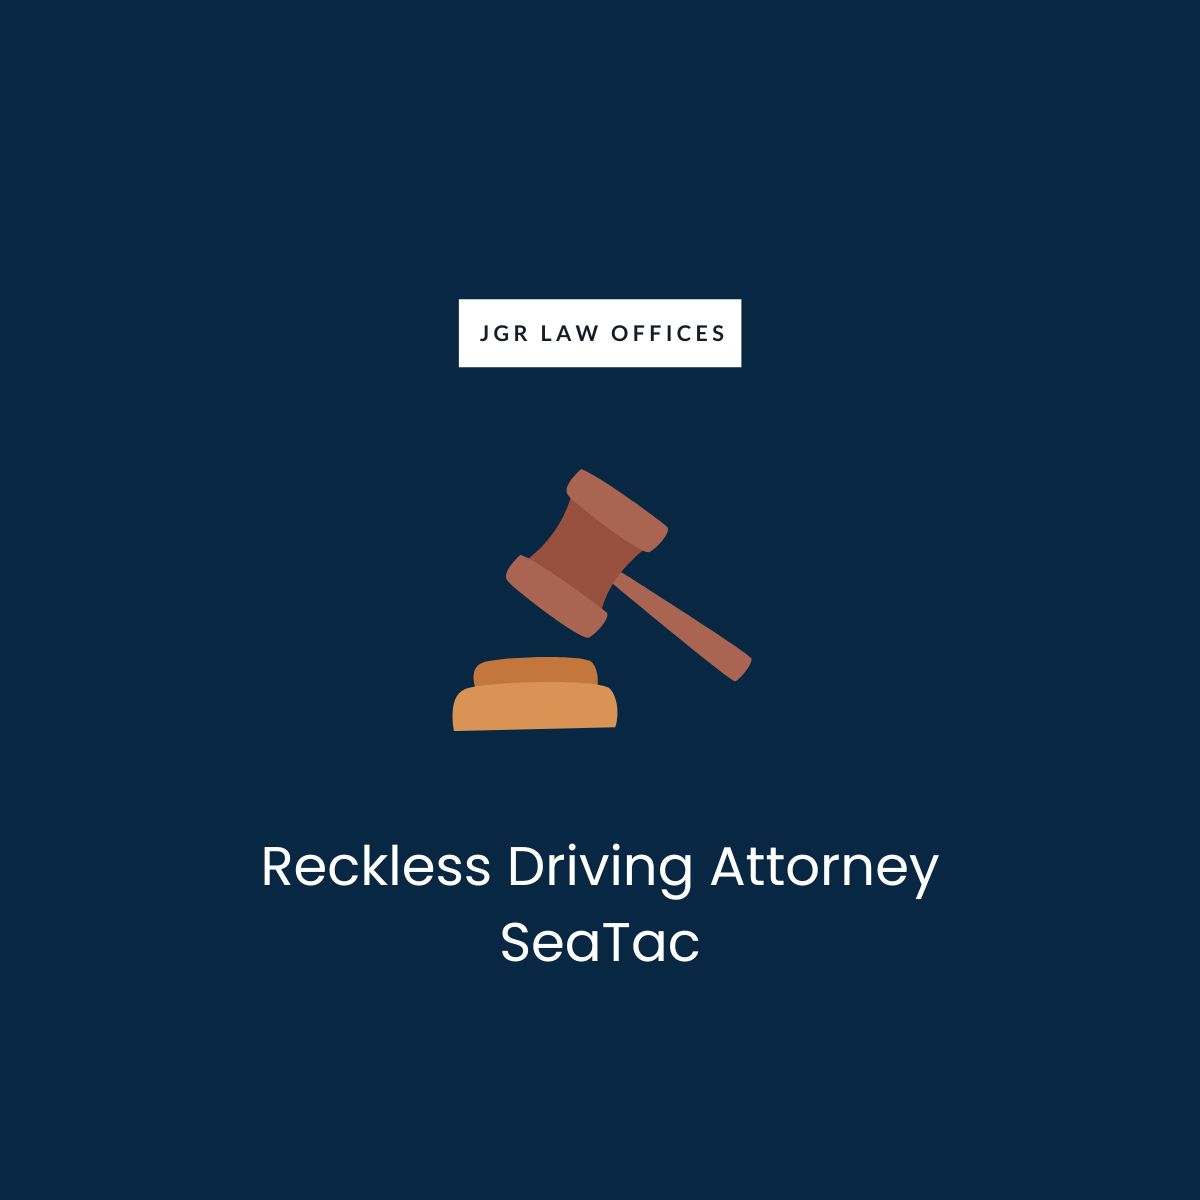 Reckless Driving Attorney SeaTac